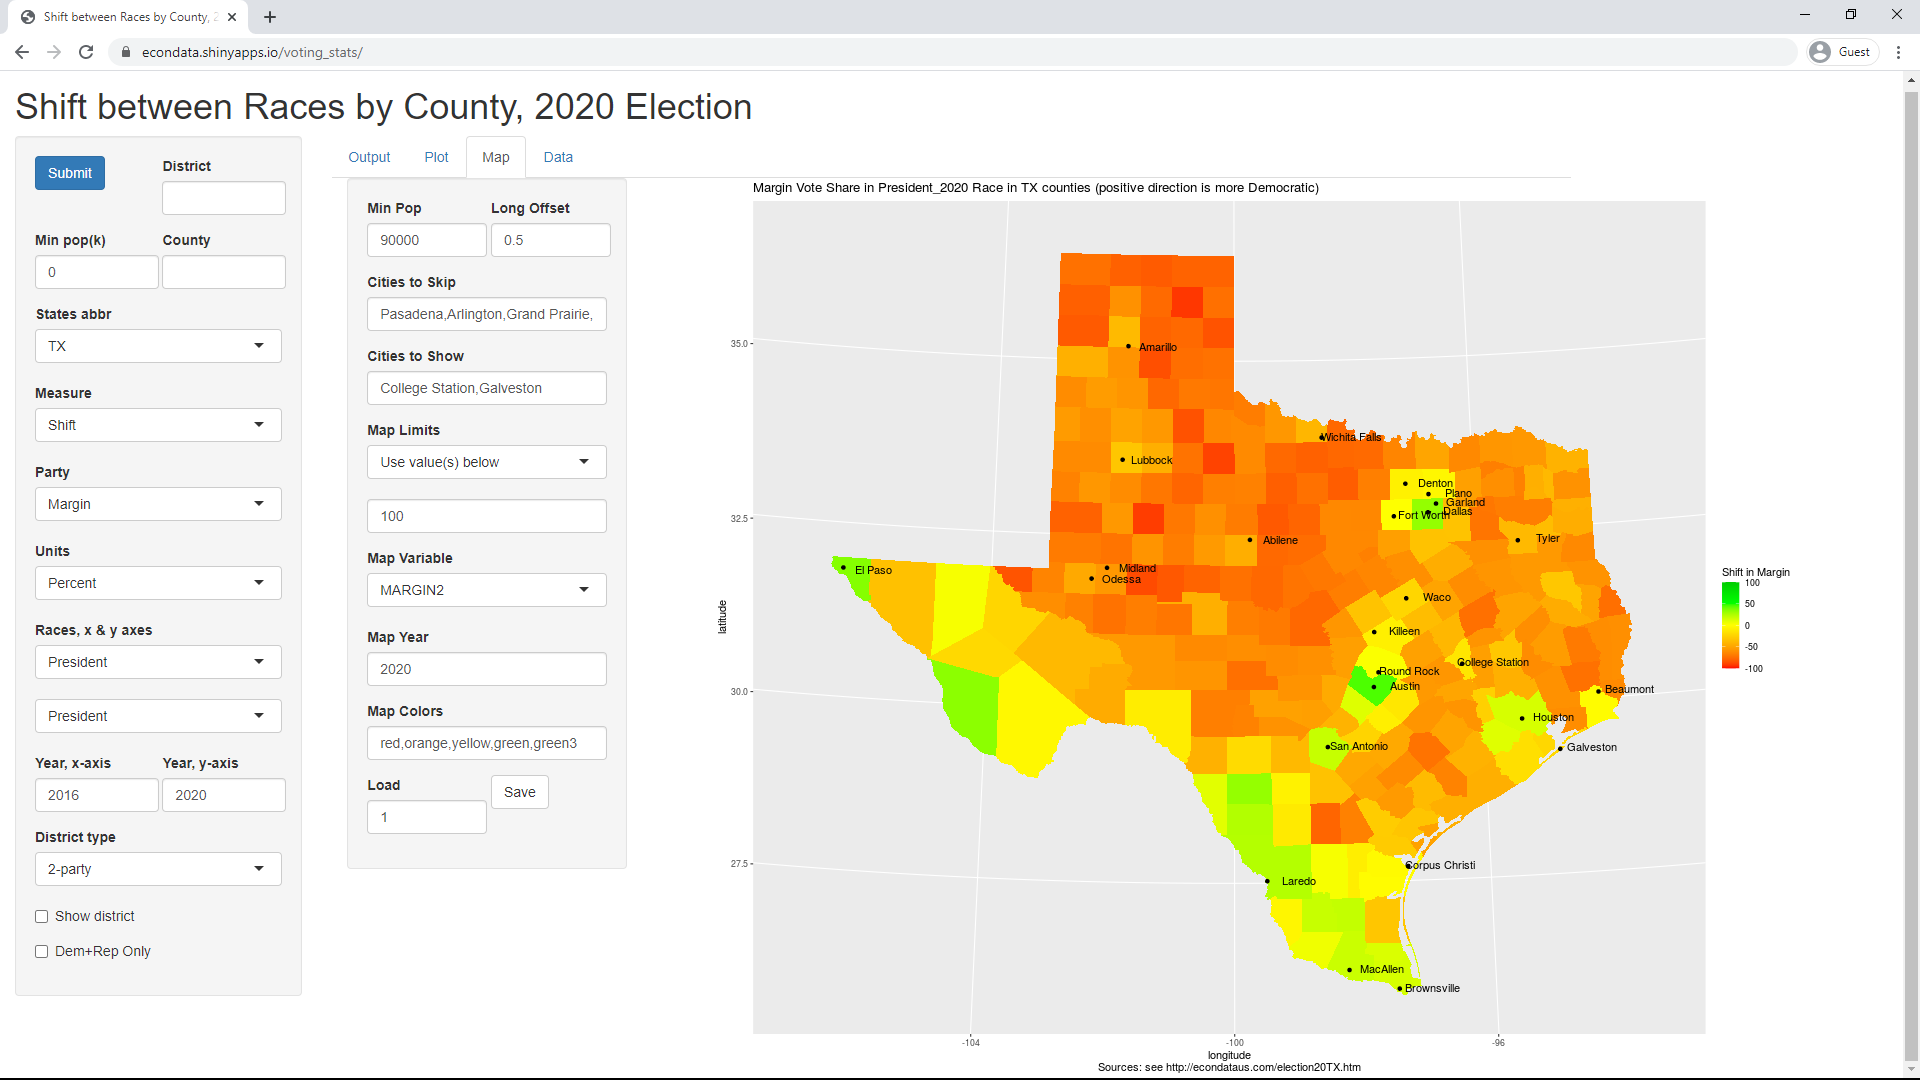 Shift in Vote Share from President_2016 to President_2020 Race in TX counties (Map Margin2)